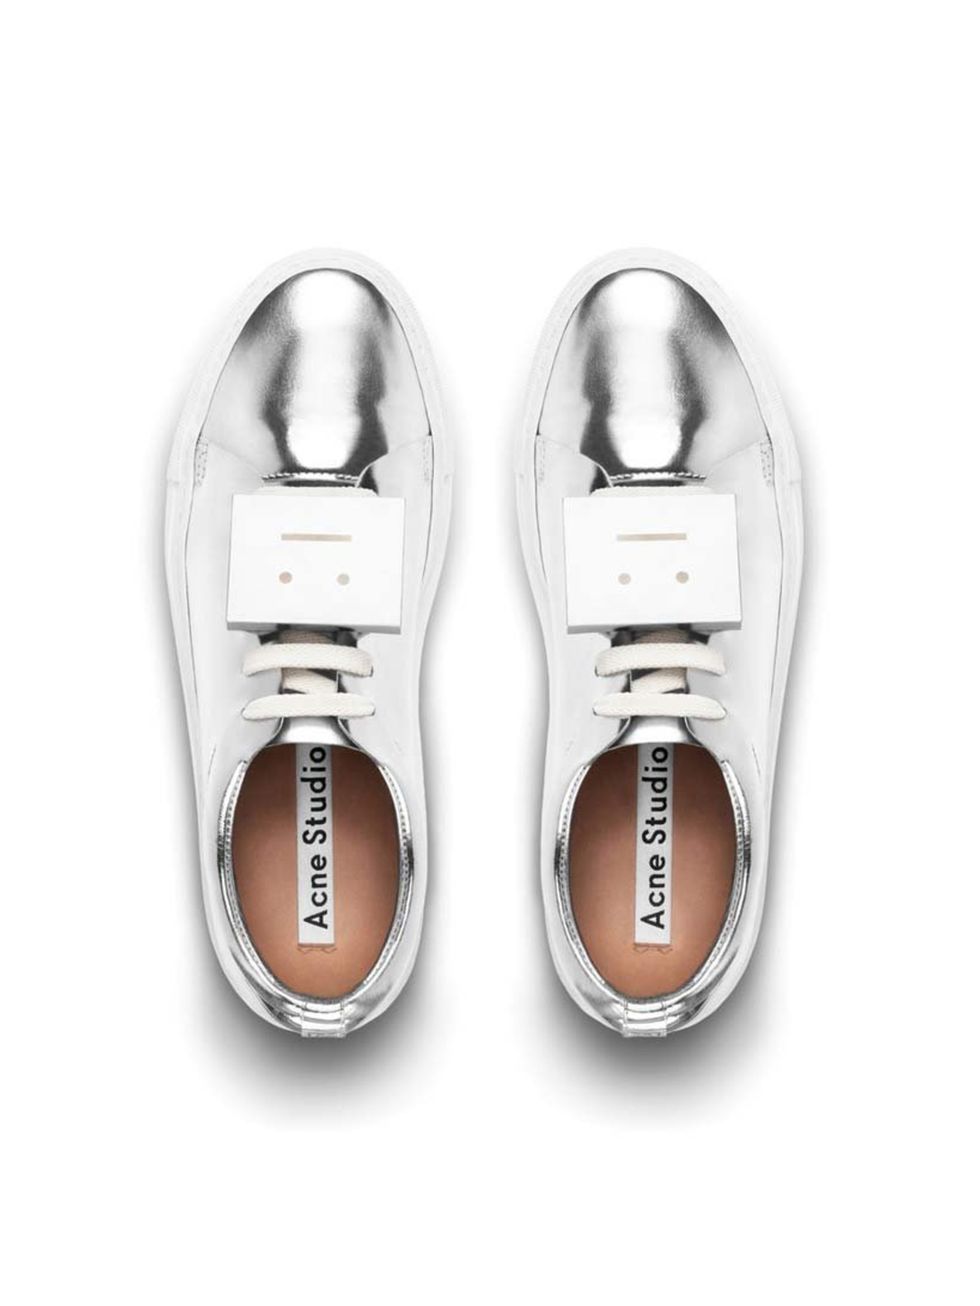 <p>Oh Acne, you had us at metallic trainers. </p><p><a href="http://www.acnestudios.com/shop/women/sneakers/adriana-metallic-silver.html">Acne</a> trainers, £300</p>